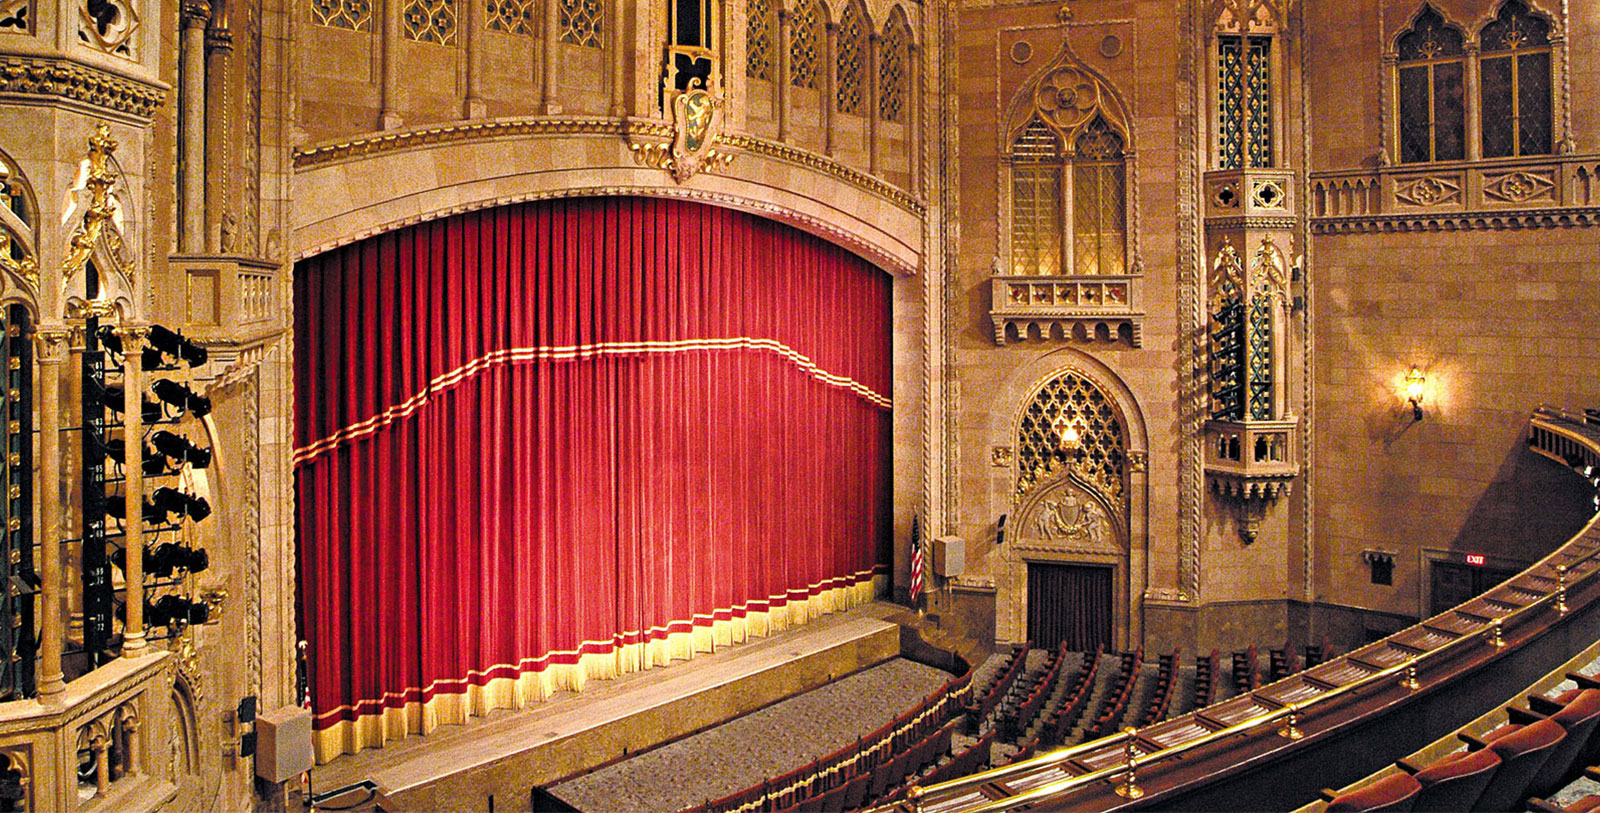 View a performance at the historic Hershey Theatre.